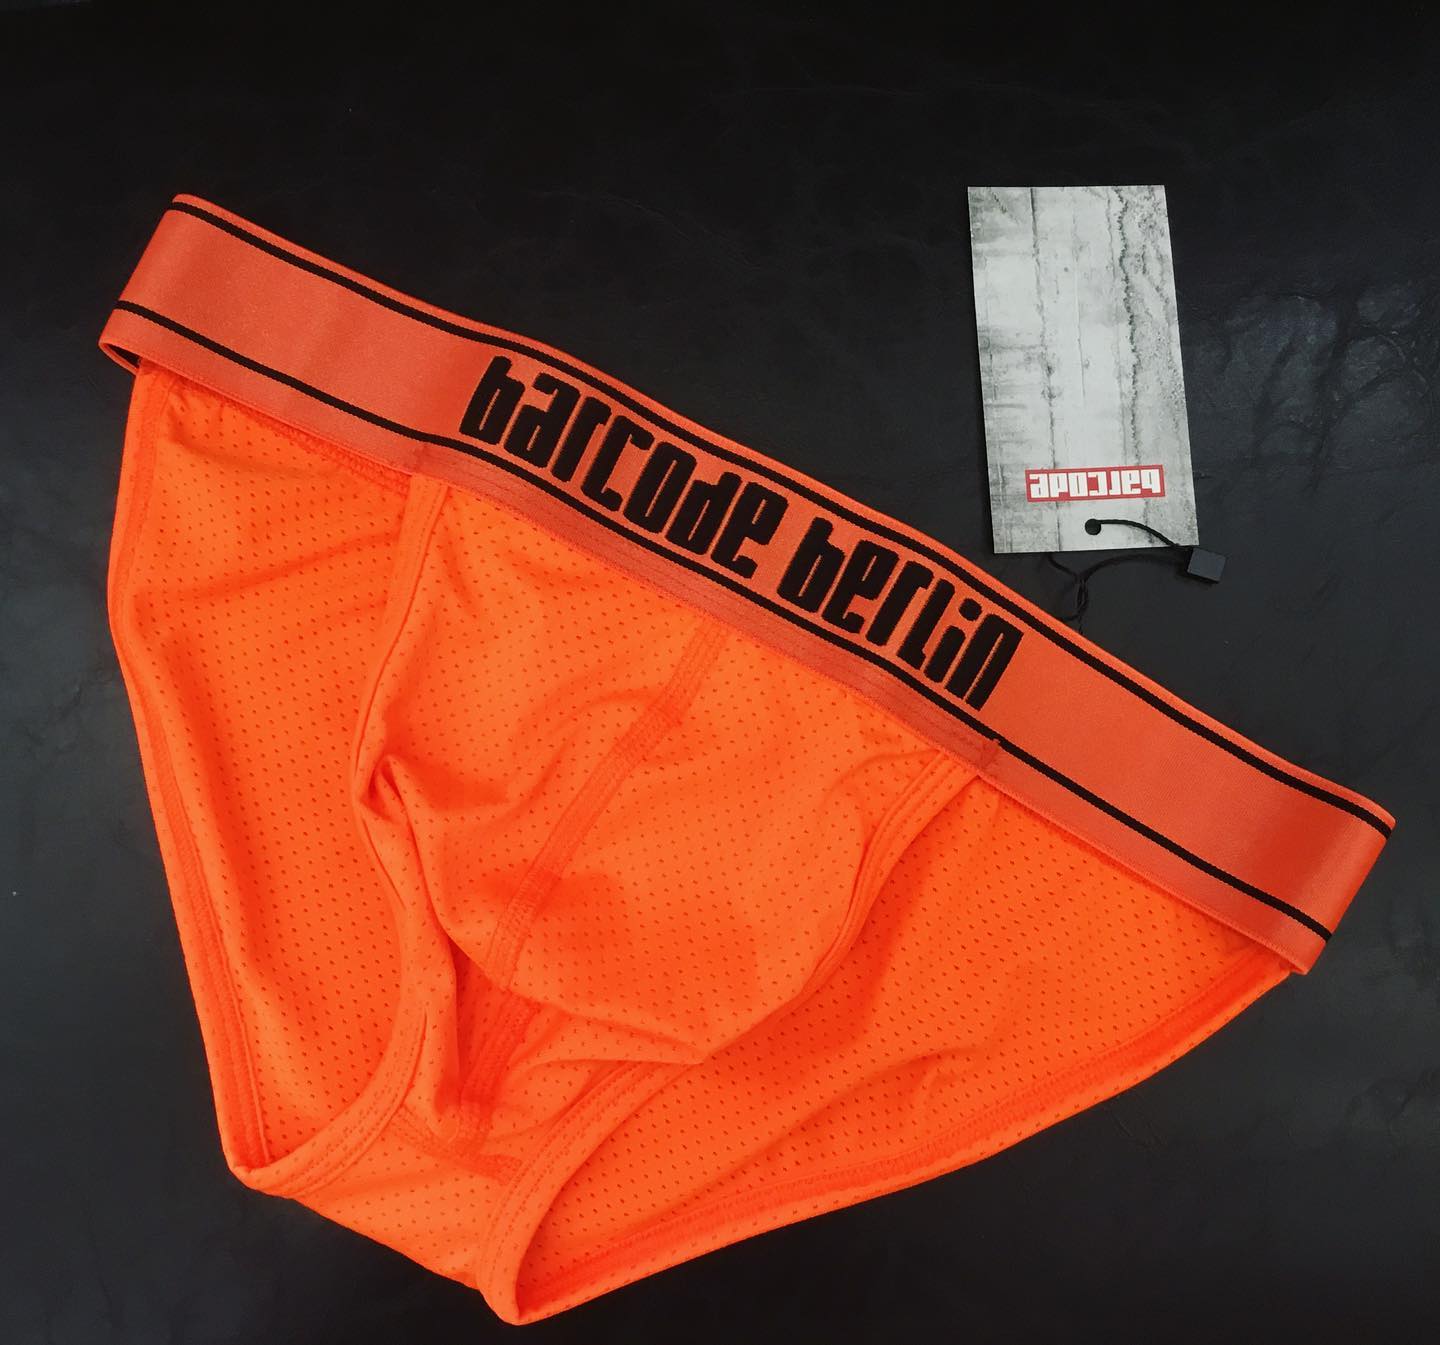 A new colour in the Tjure Briefs of Barcode Berlin is now available in our store. Have a look at the fashionable neon orange:
____
https://menandunderwear.com/shop/underwear/barcode-berlin-brief-tjure-neon-orange